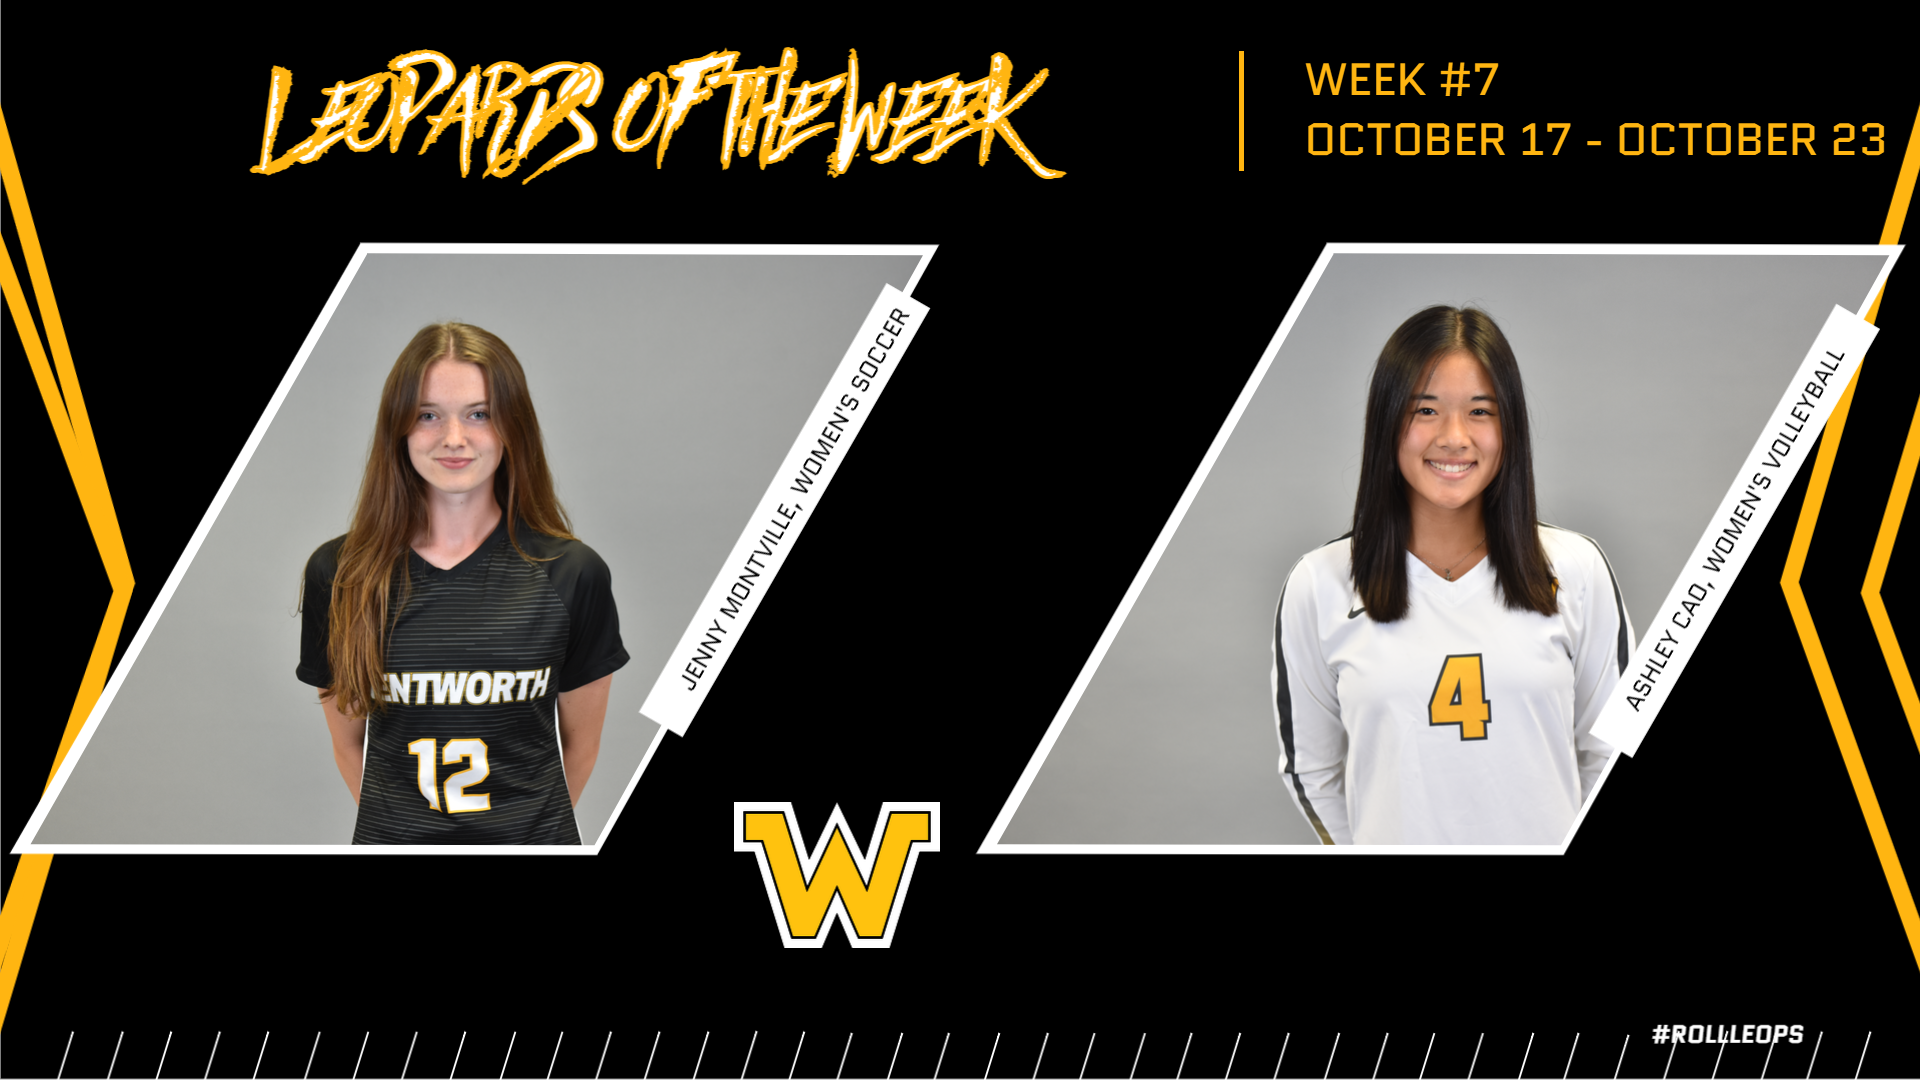 Montville, Cao Named Leopards of the Week